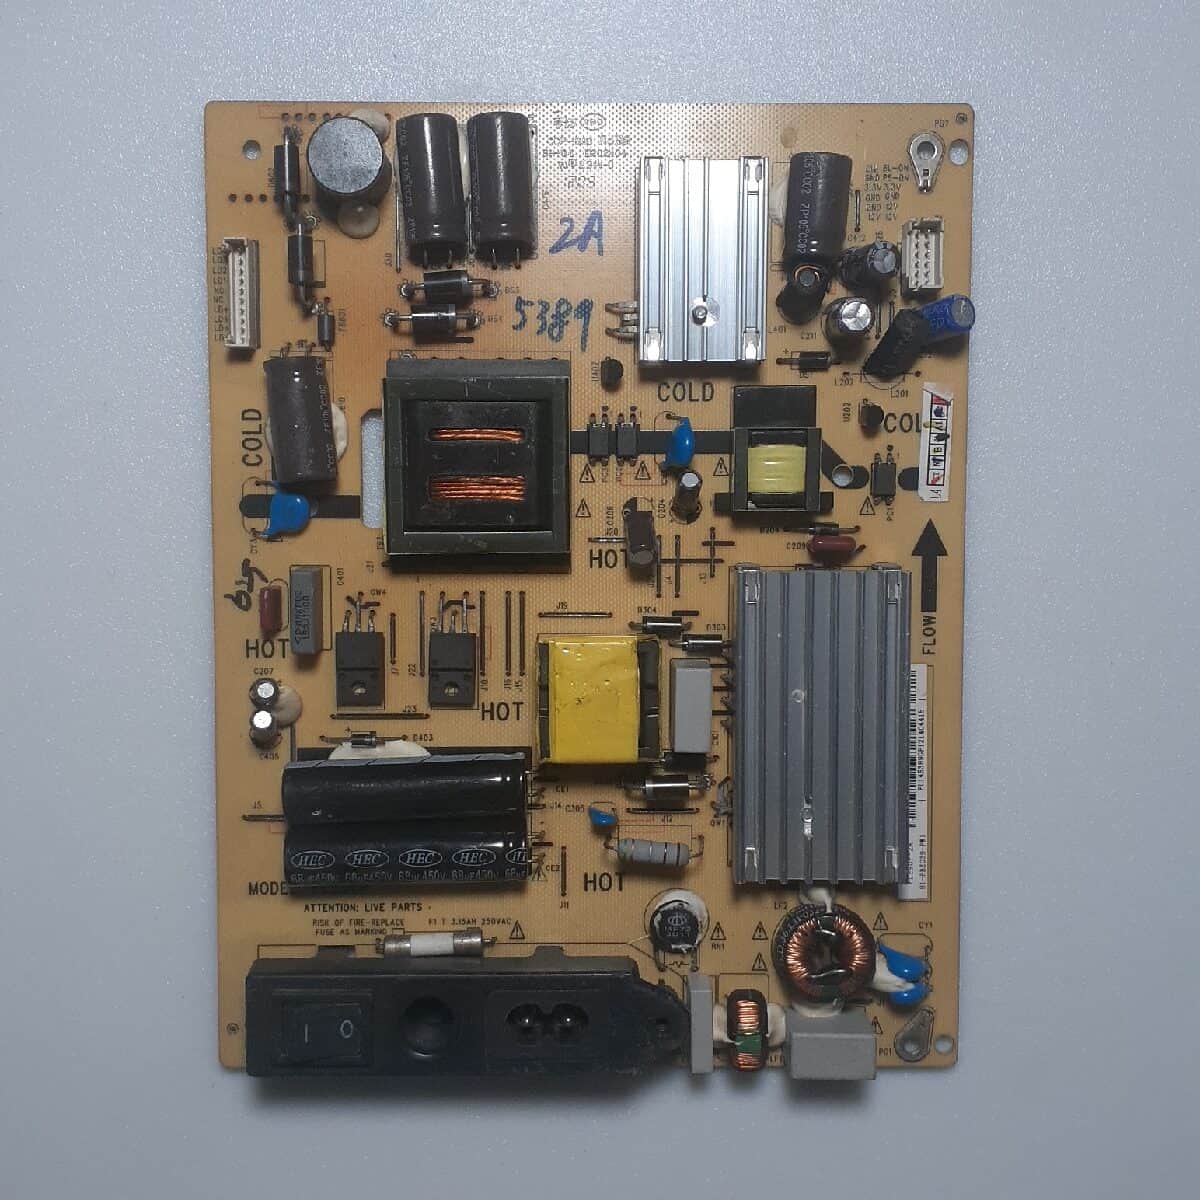 LED42C830S TCL POWER SUPPLY BOARD FOR LED TV